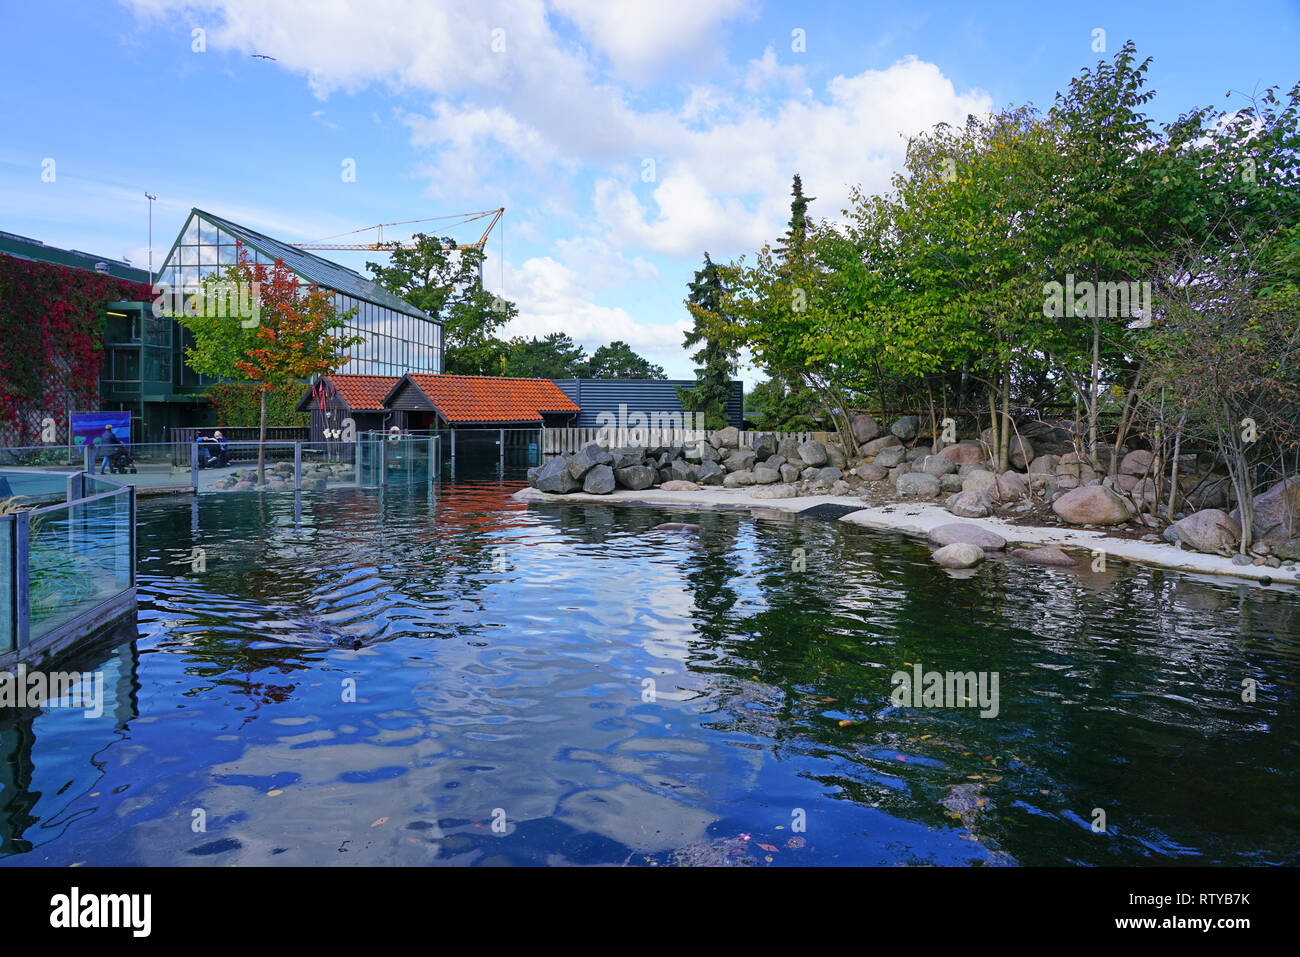 COPENHAGEN, DENMARK -24 SEP 2018- View of the Copenhagen Zoo, located in Frederiksberg. It is one of the oldest zoological gardens in Europe. Stock Photo